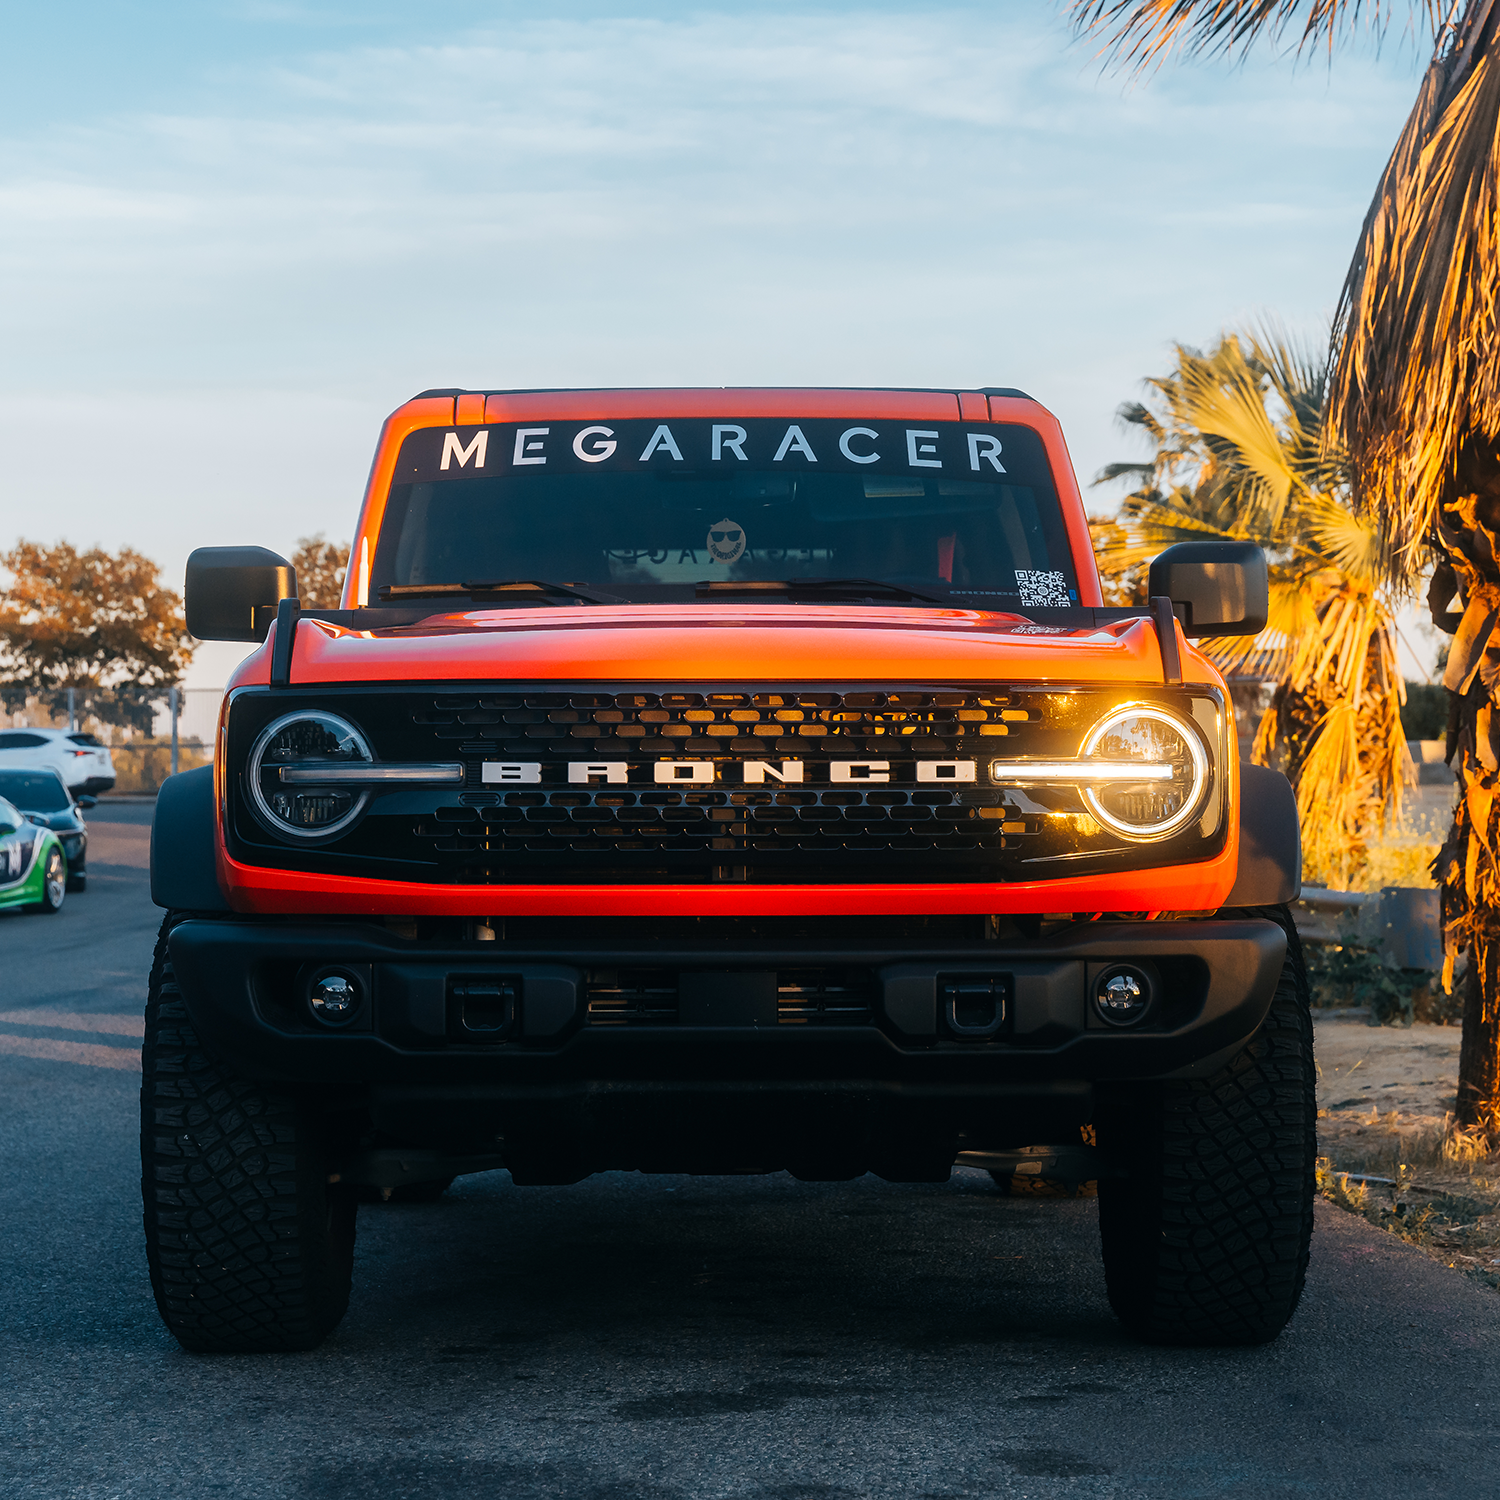 Mega racer is an automotive accessories brand based in Los Angeles, California USA